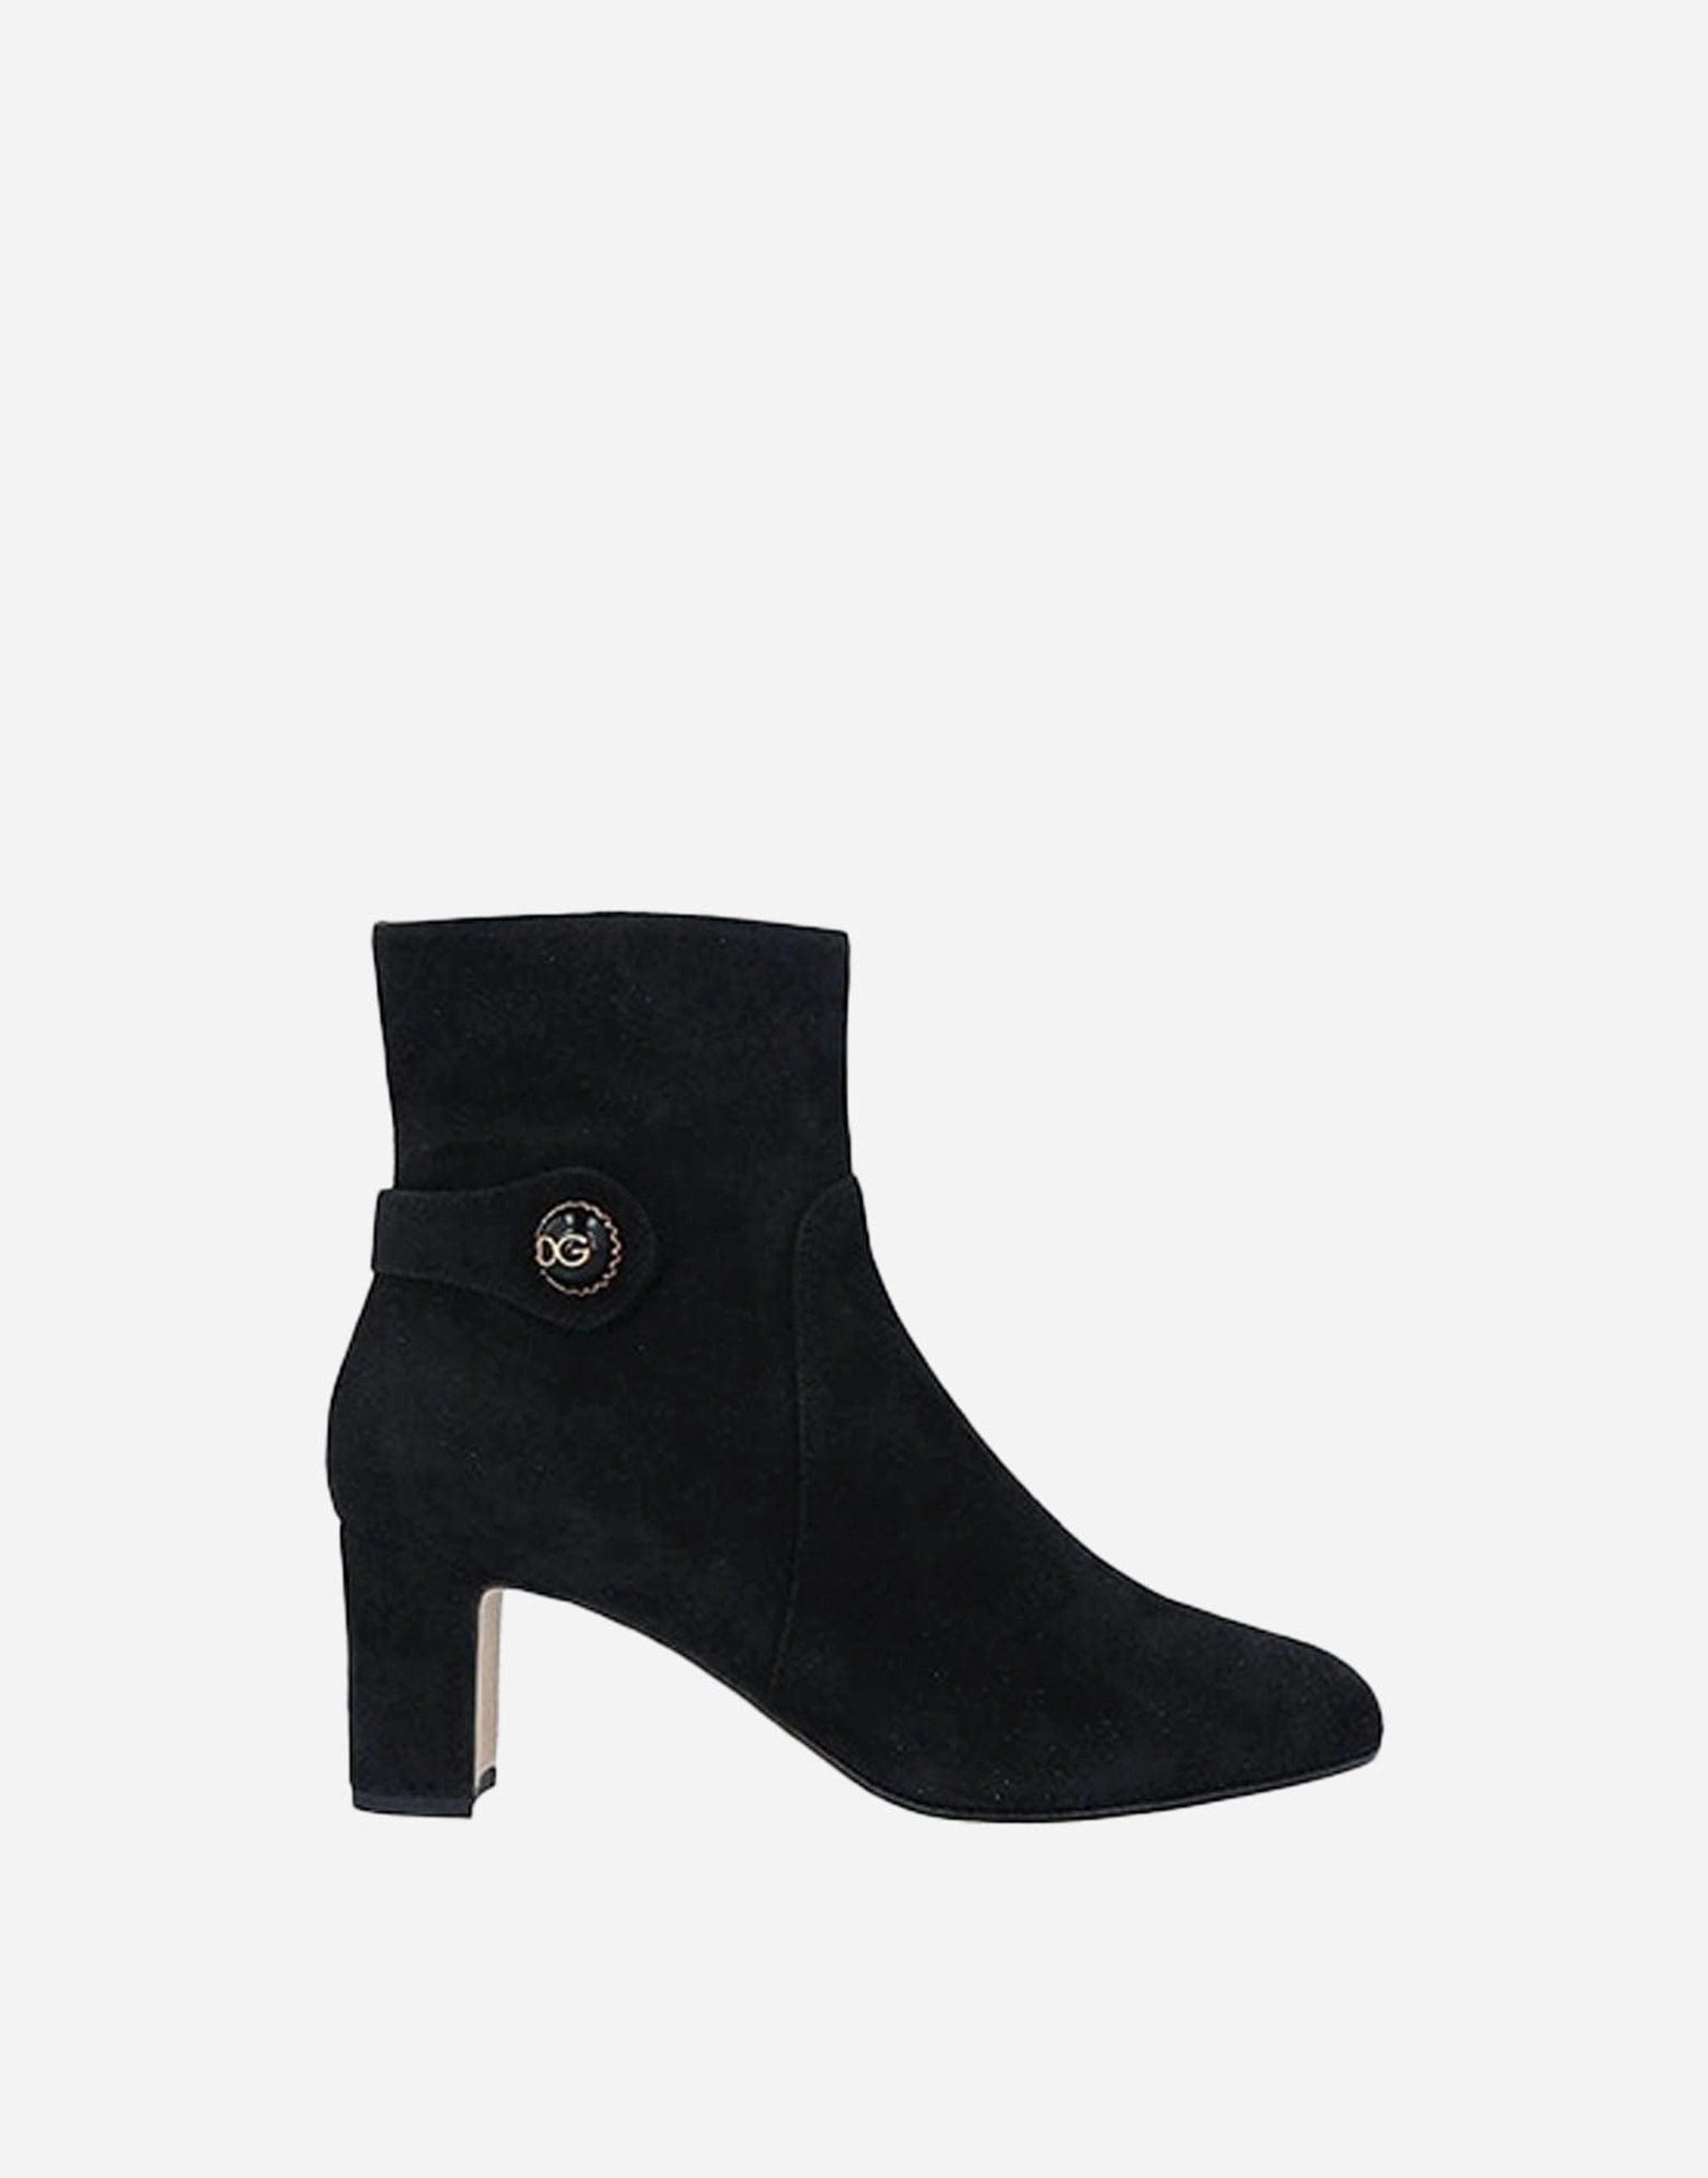 Dolce & Gabbana Suede Ankle Boots